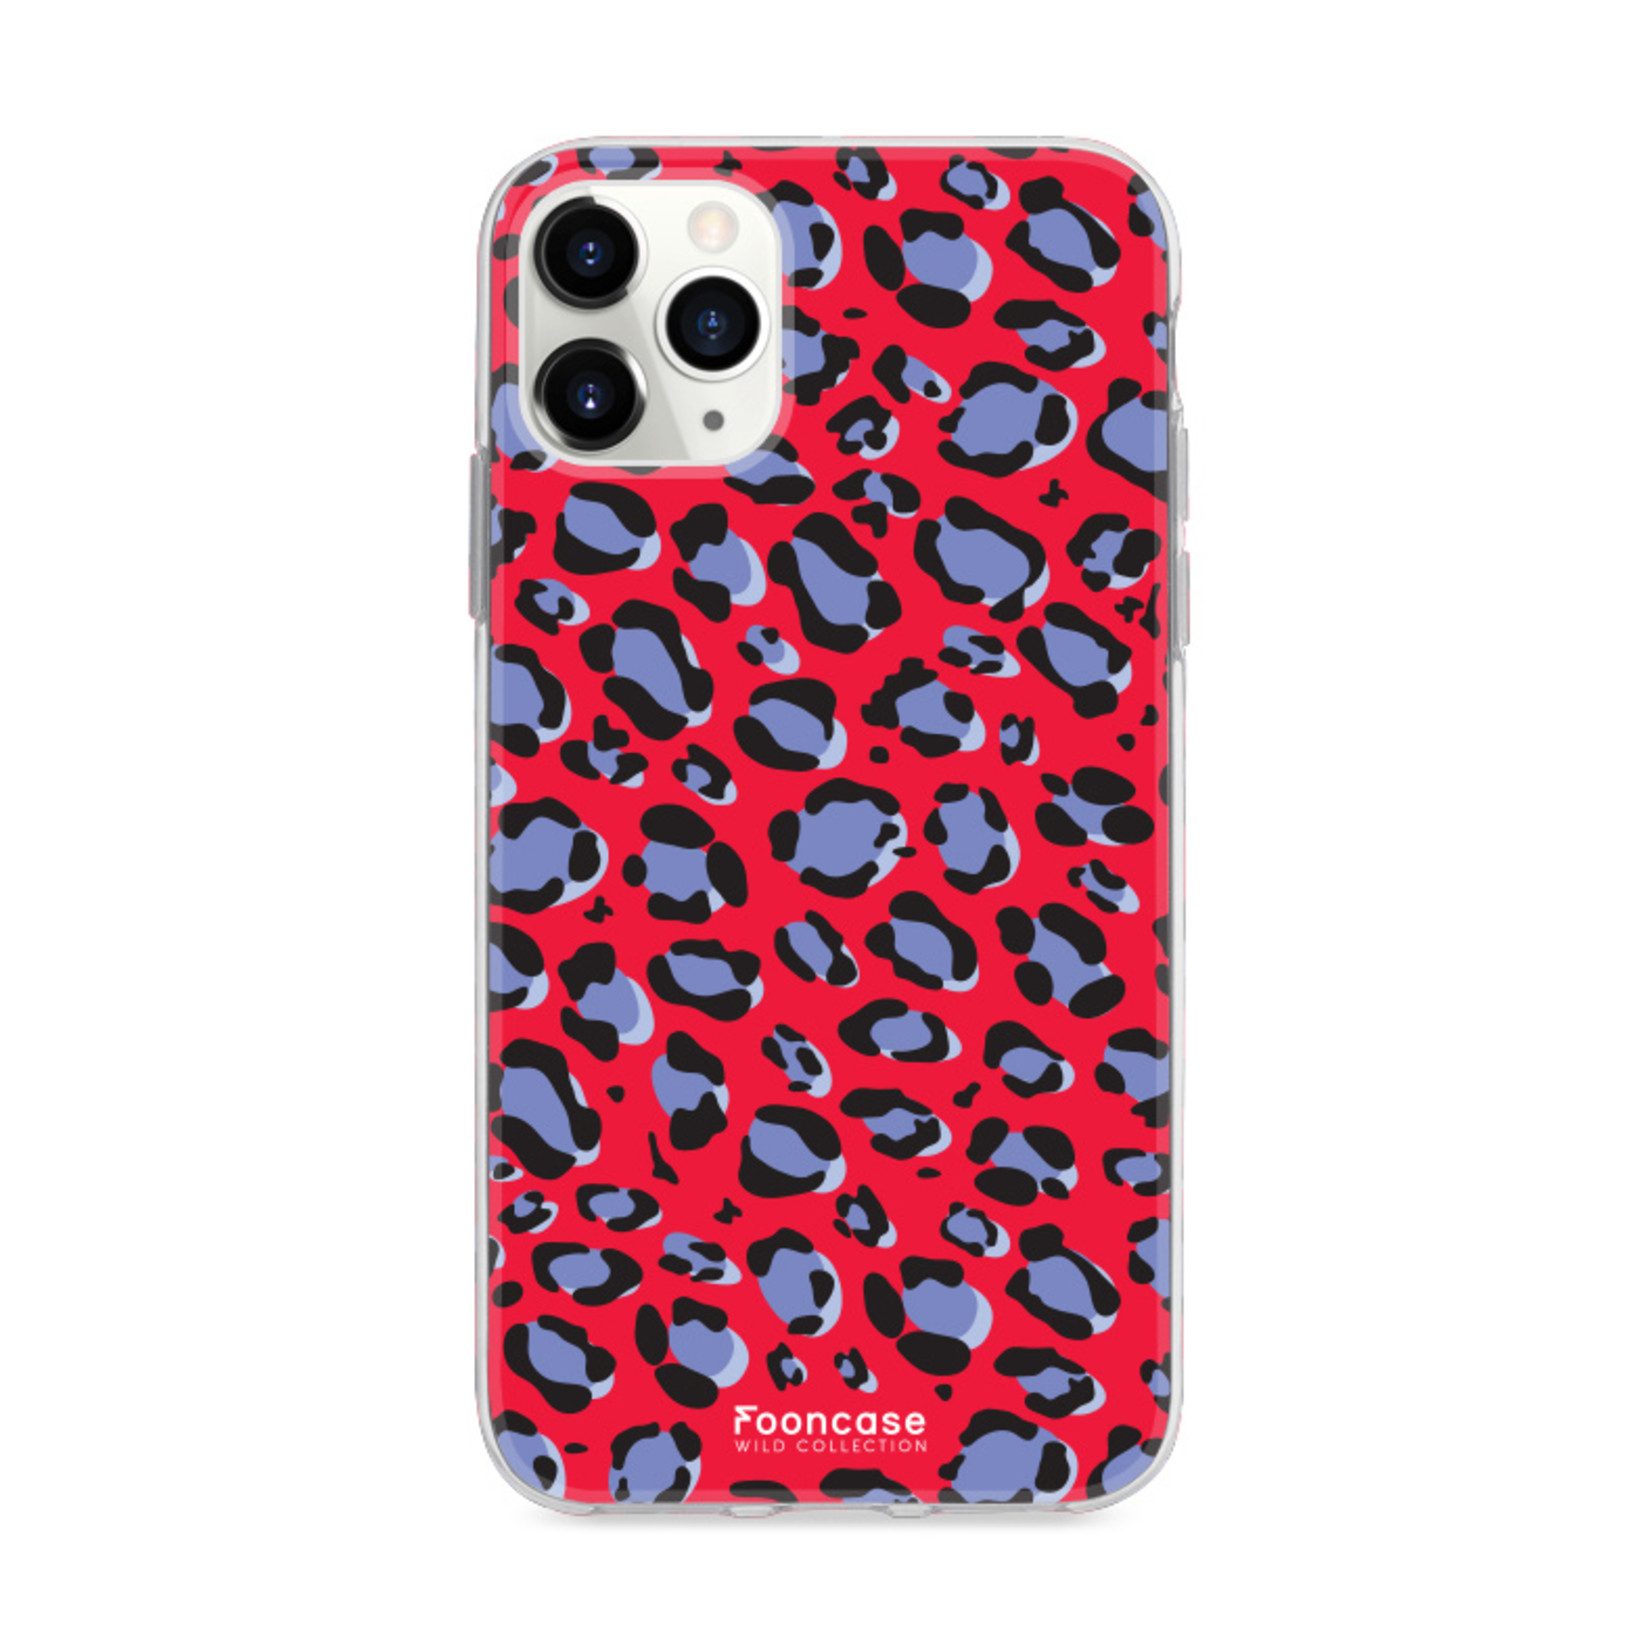 FOONCASE IPhone 11 Pro - WILD COLLECTION / Rot